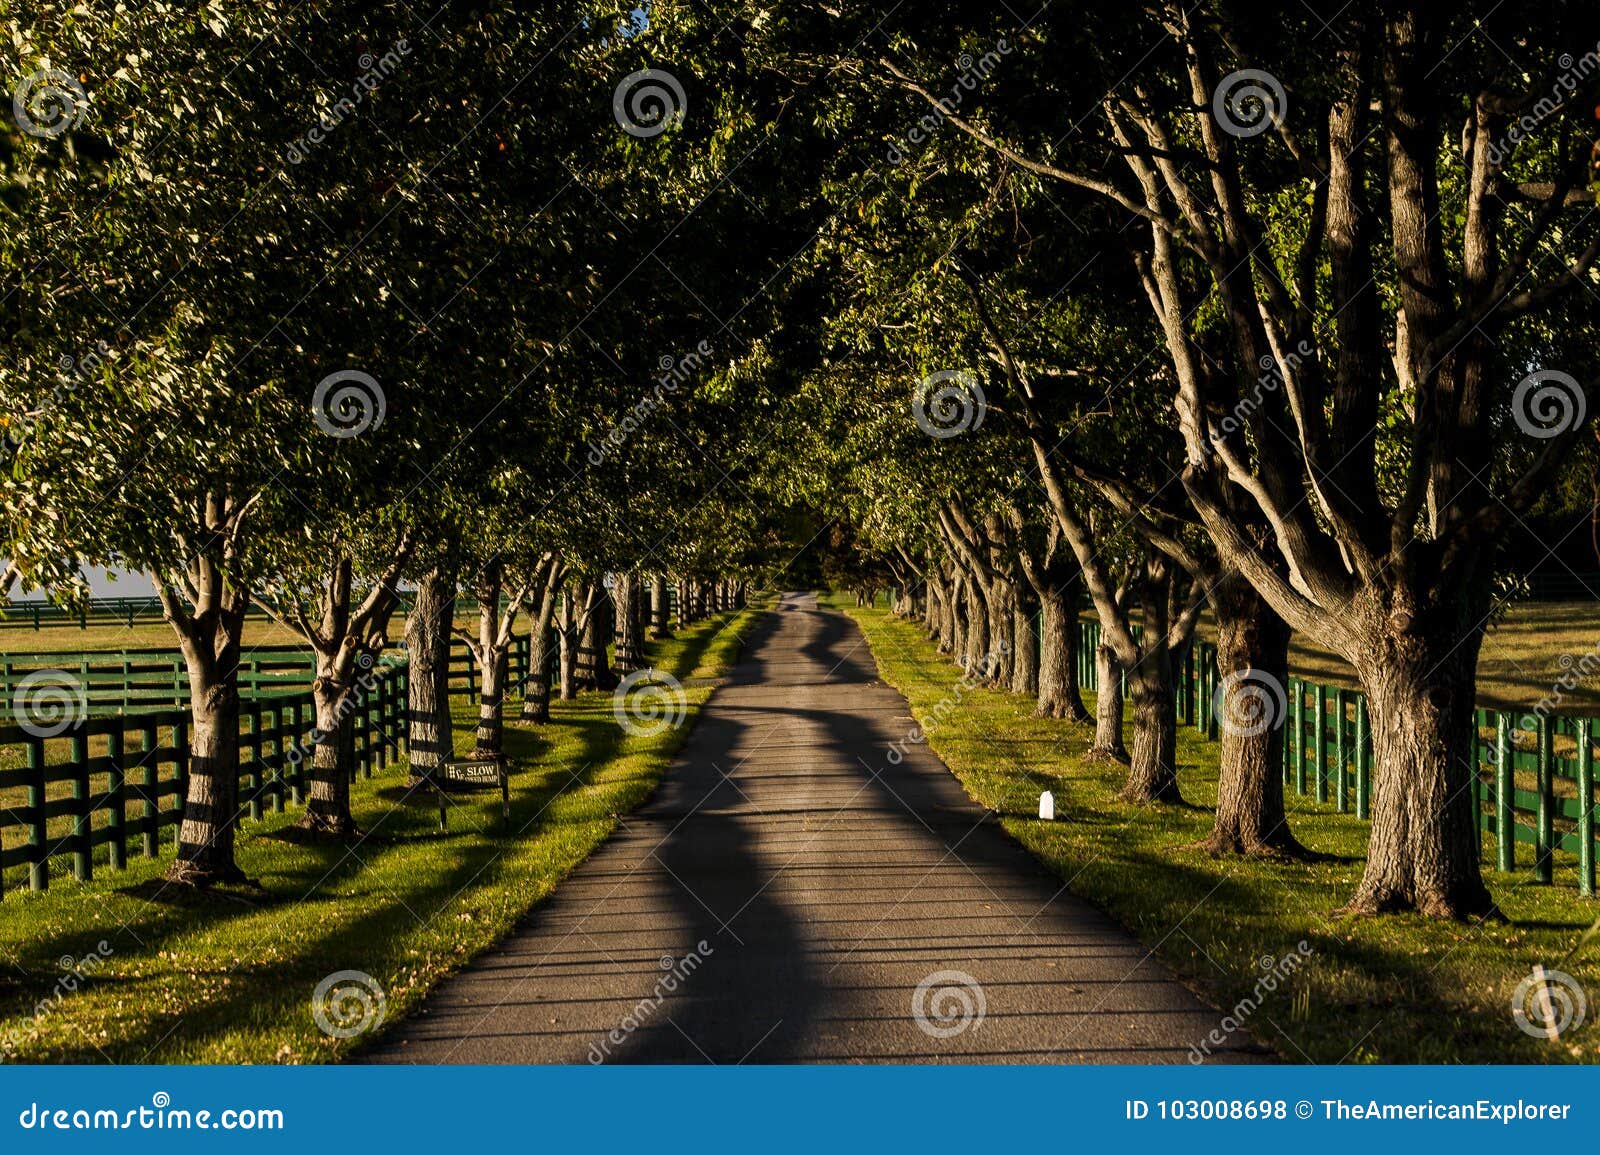 one-lane, tree-lined road with black fences - bluegrass region of kentucky